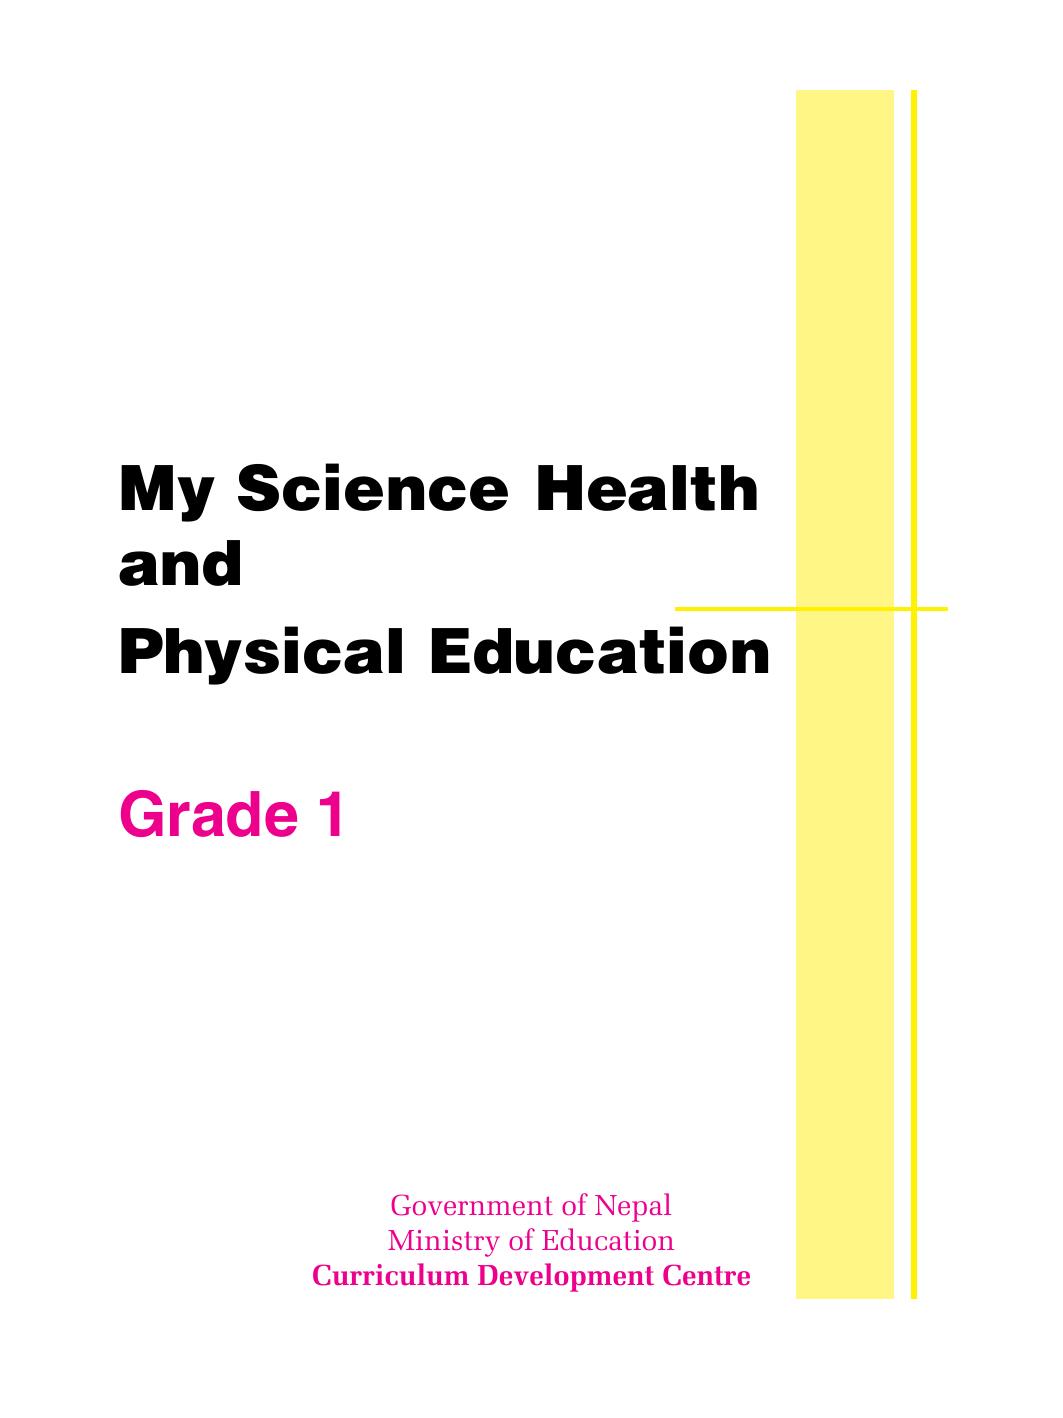 My Science Health and Physical Education Grade 1